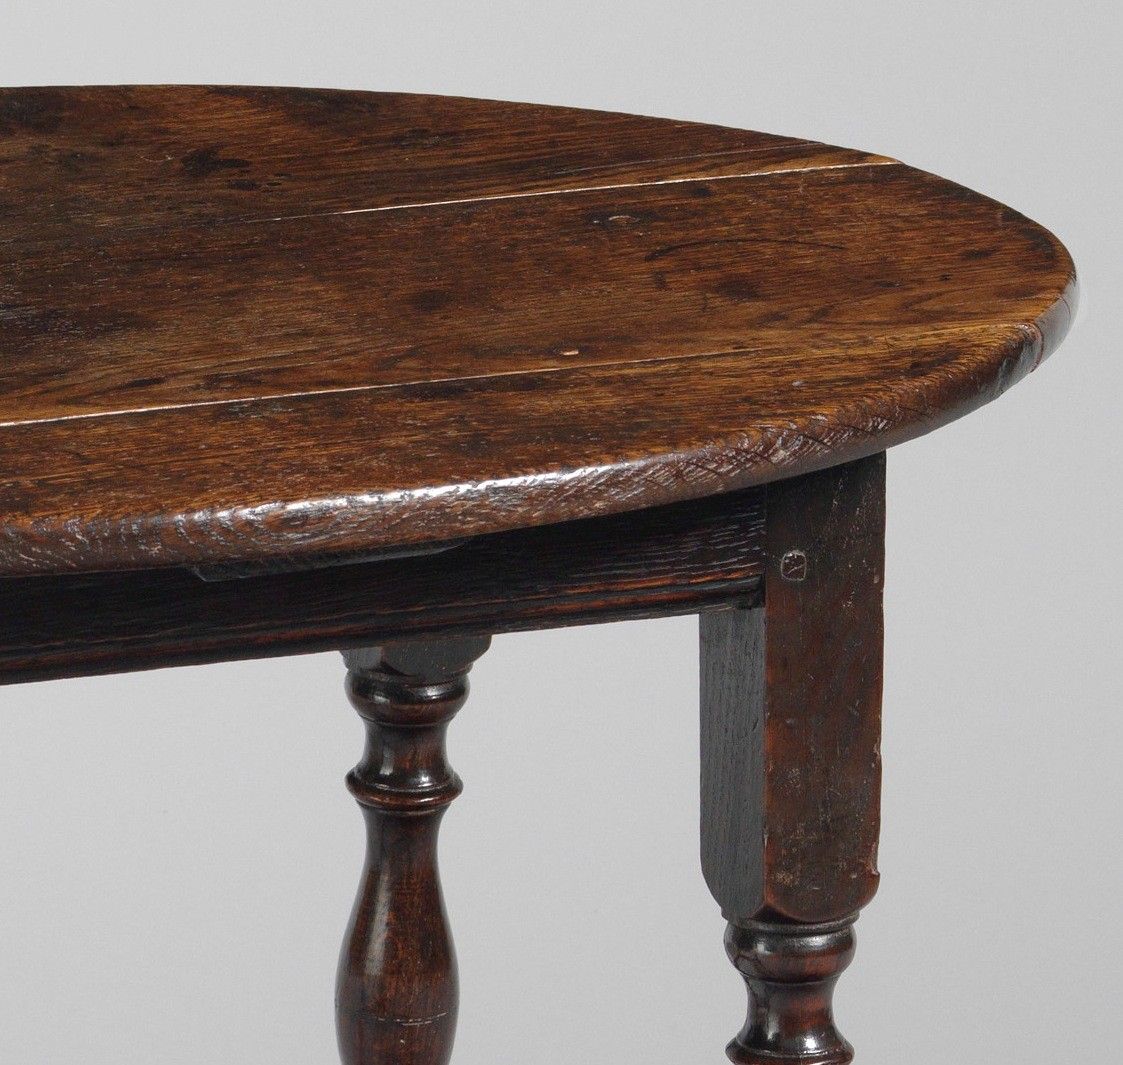 Rare Early Oval Topped Joined Baluster Leg Table